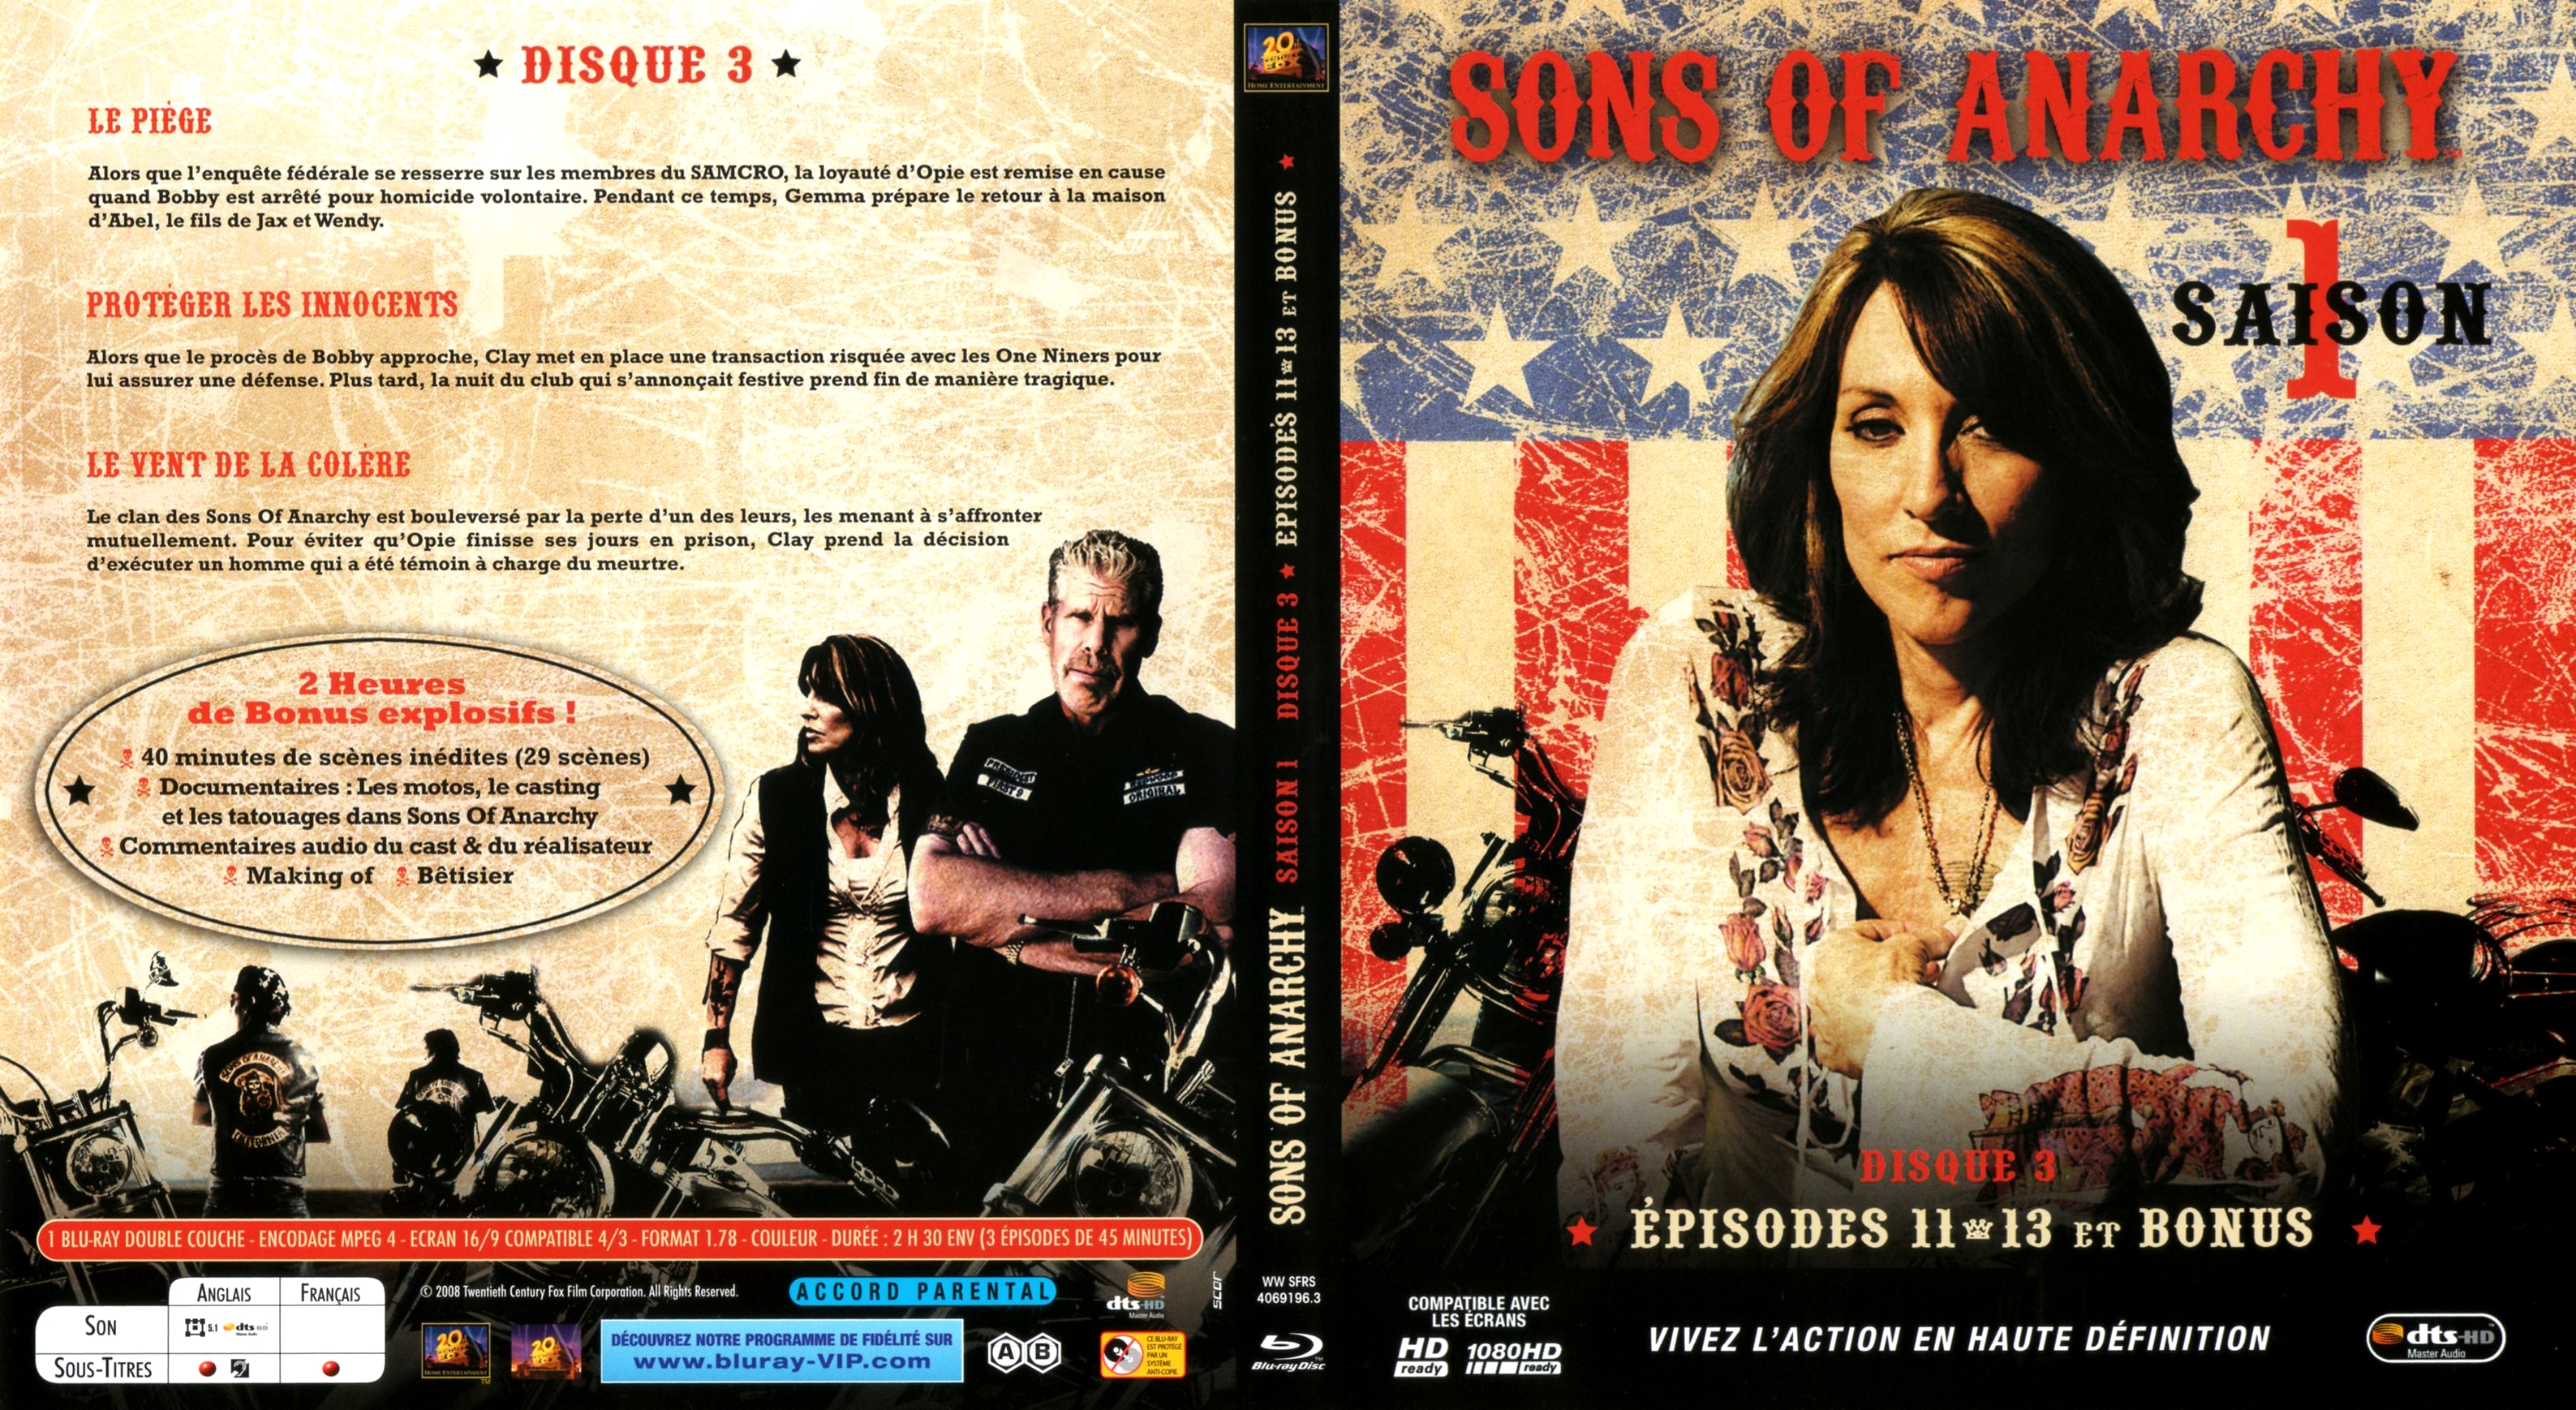 Jaquette DVD Sons of anarchy Saison 1 DISC 3 (BLU-RAY)